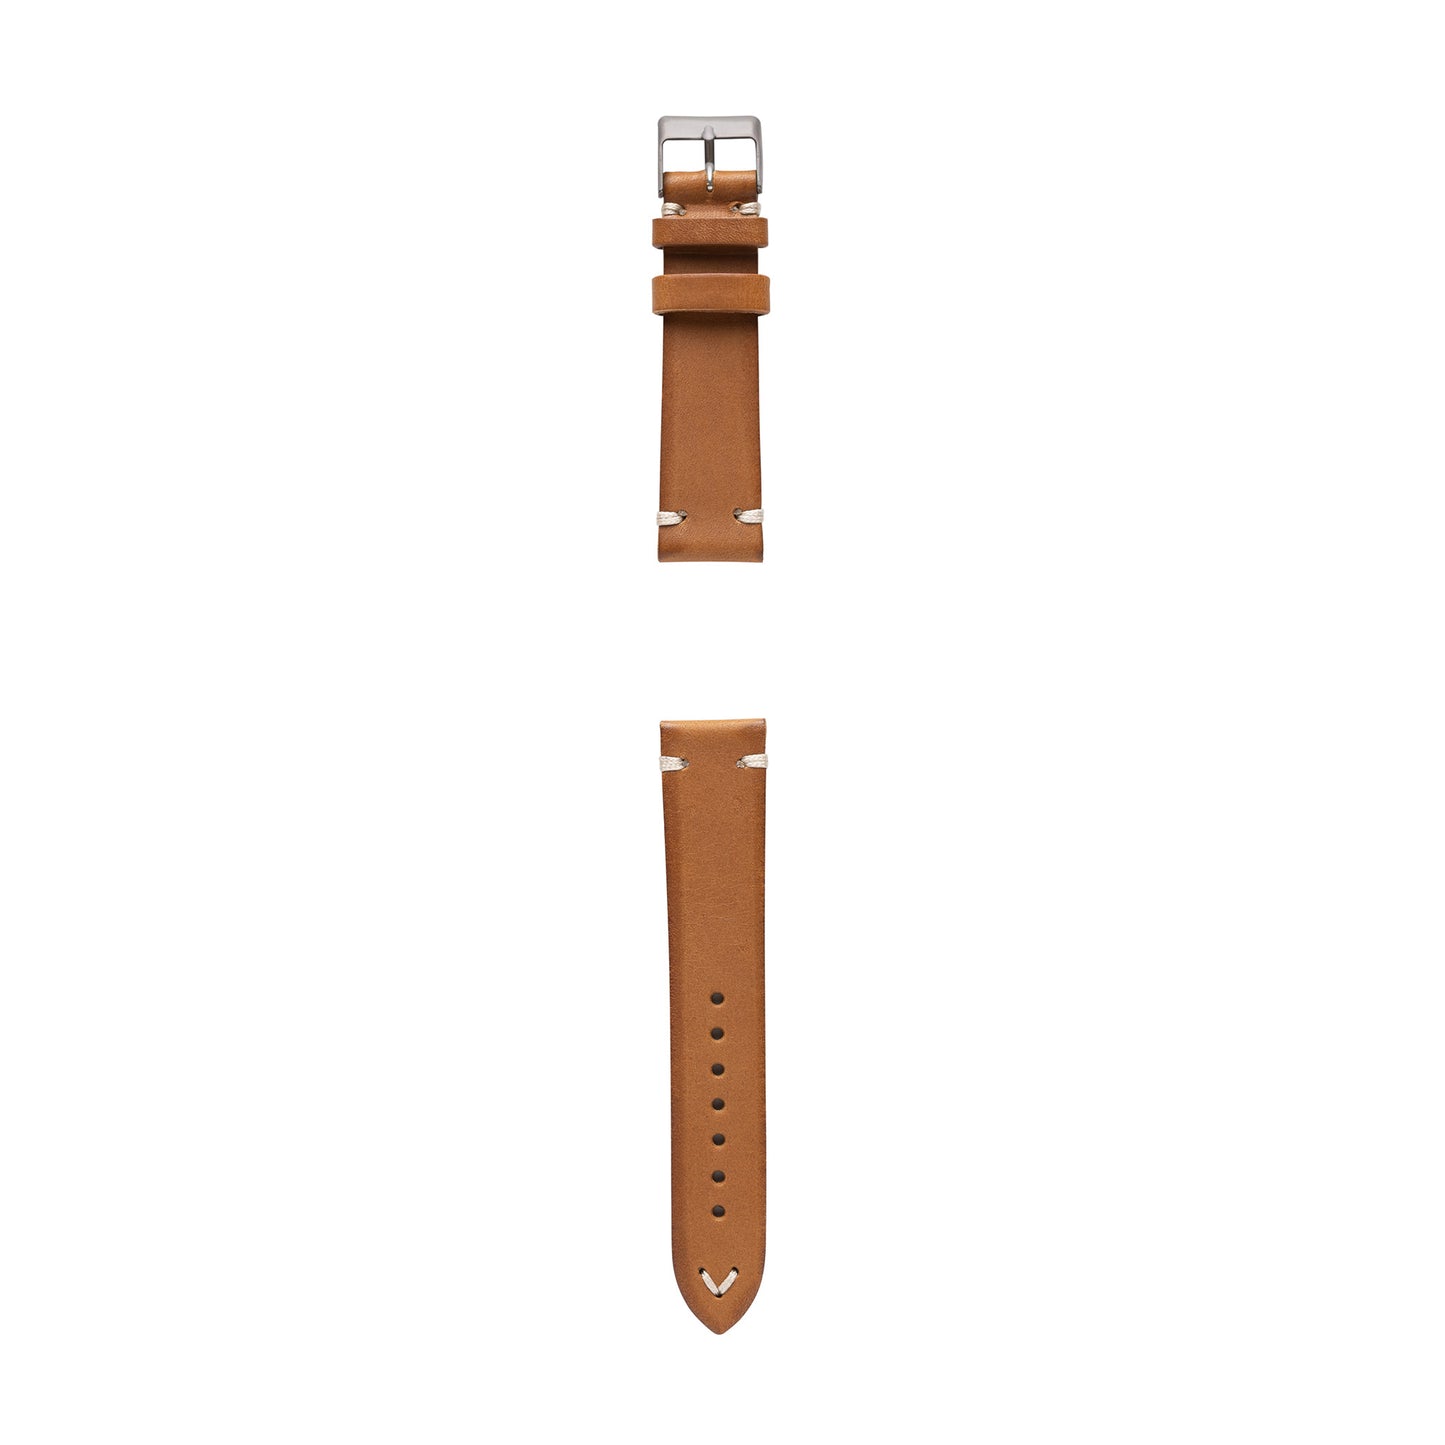 vintage Italian leather watch strap made in Italy saddle tan color (front)